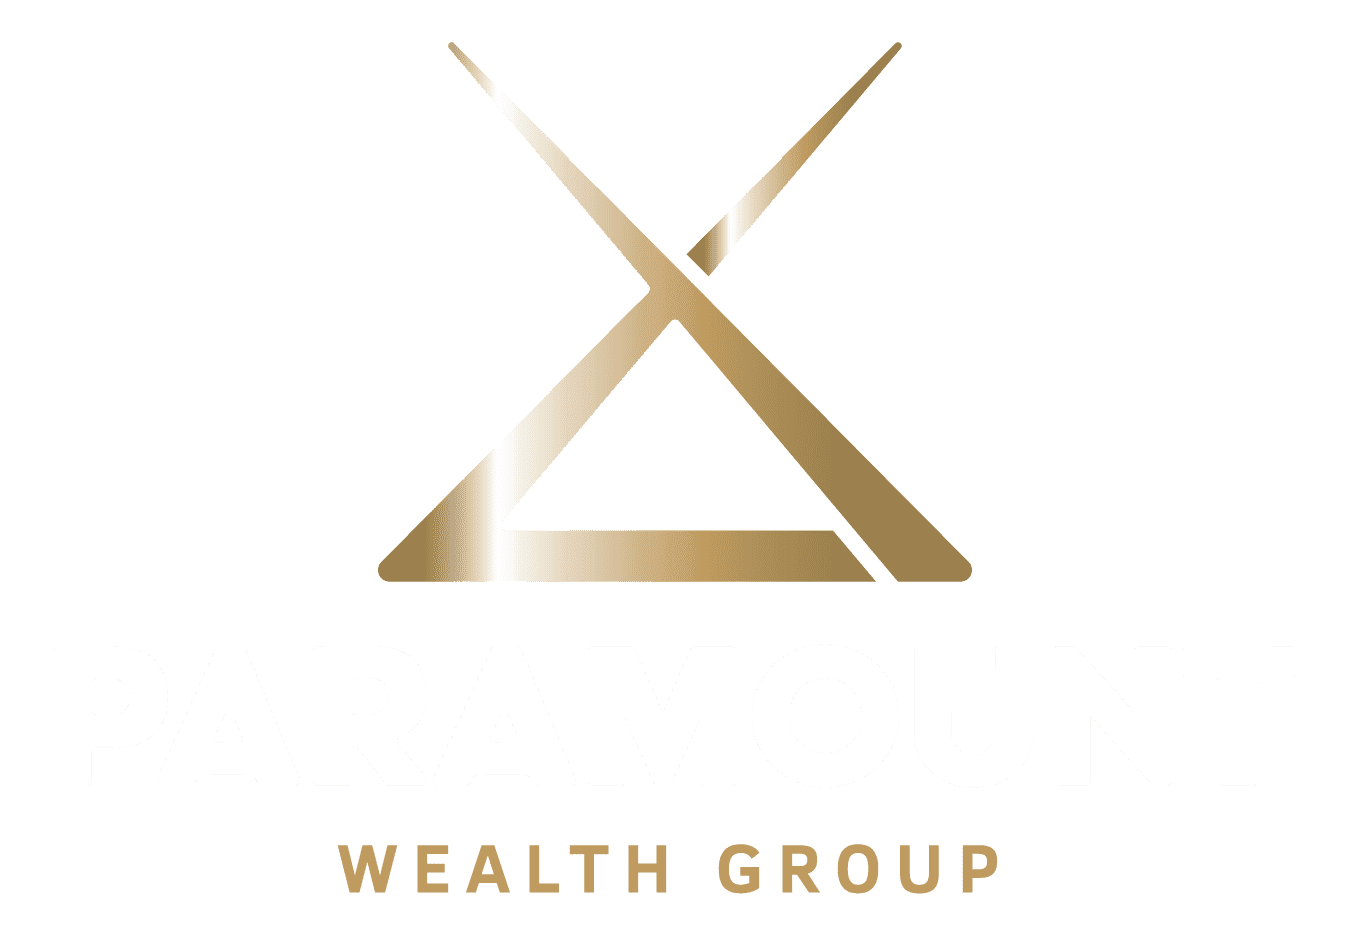 A gold and white logo for paramount wealth group.